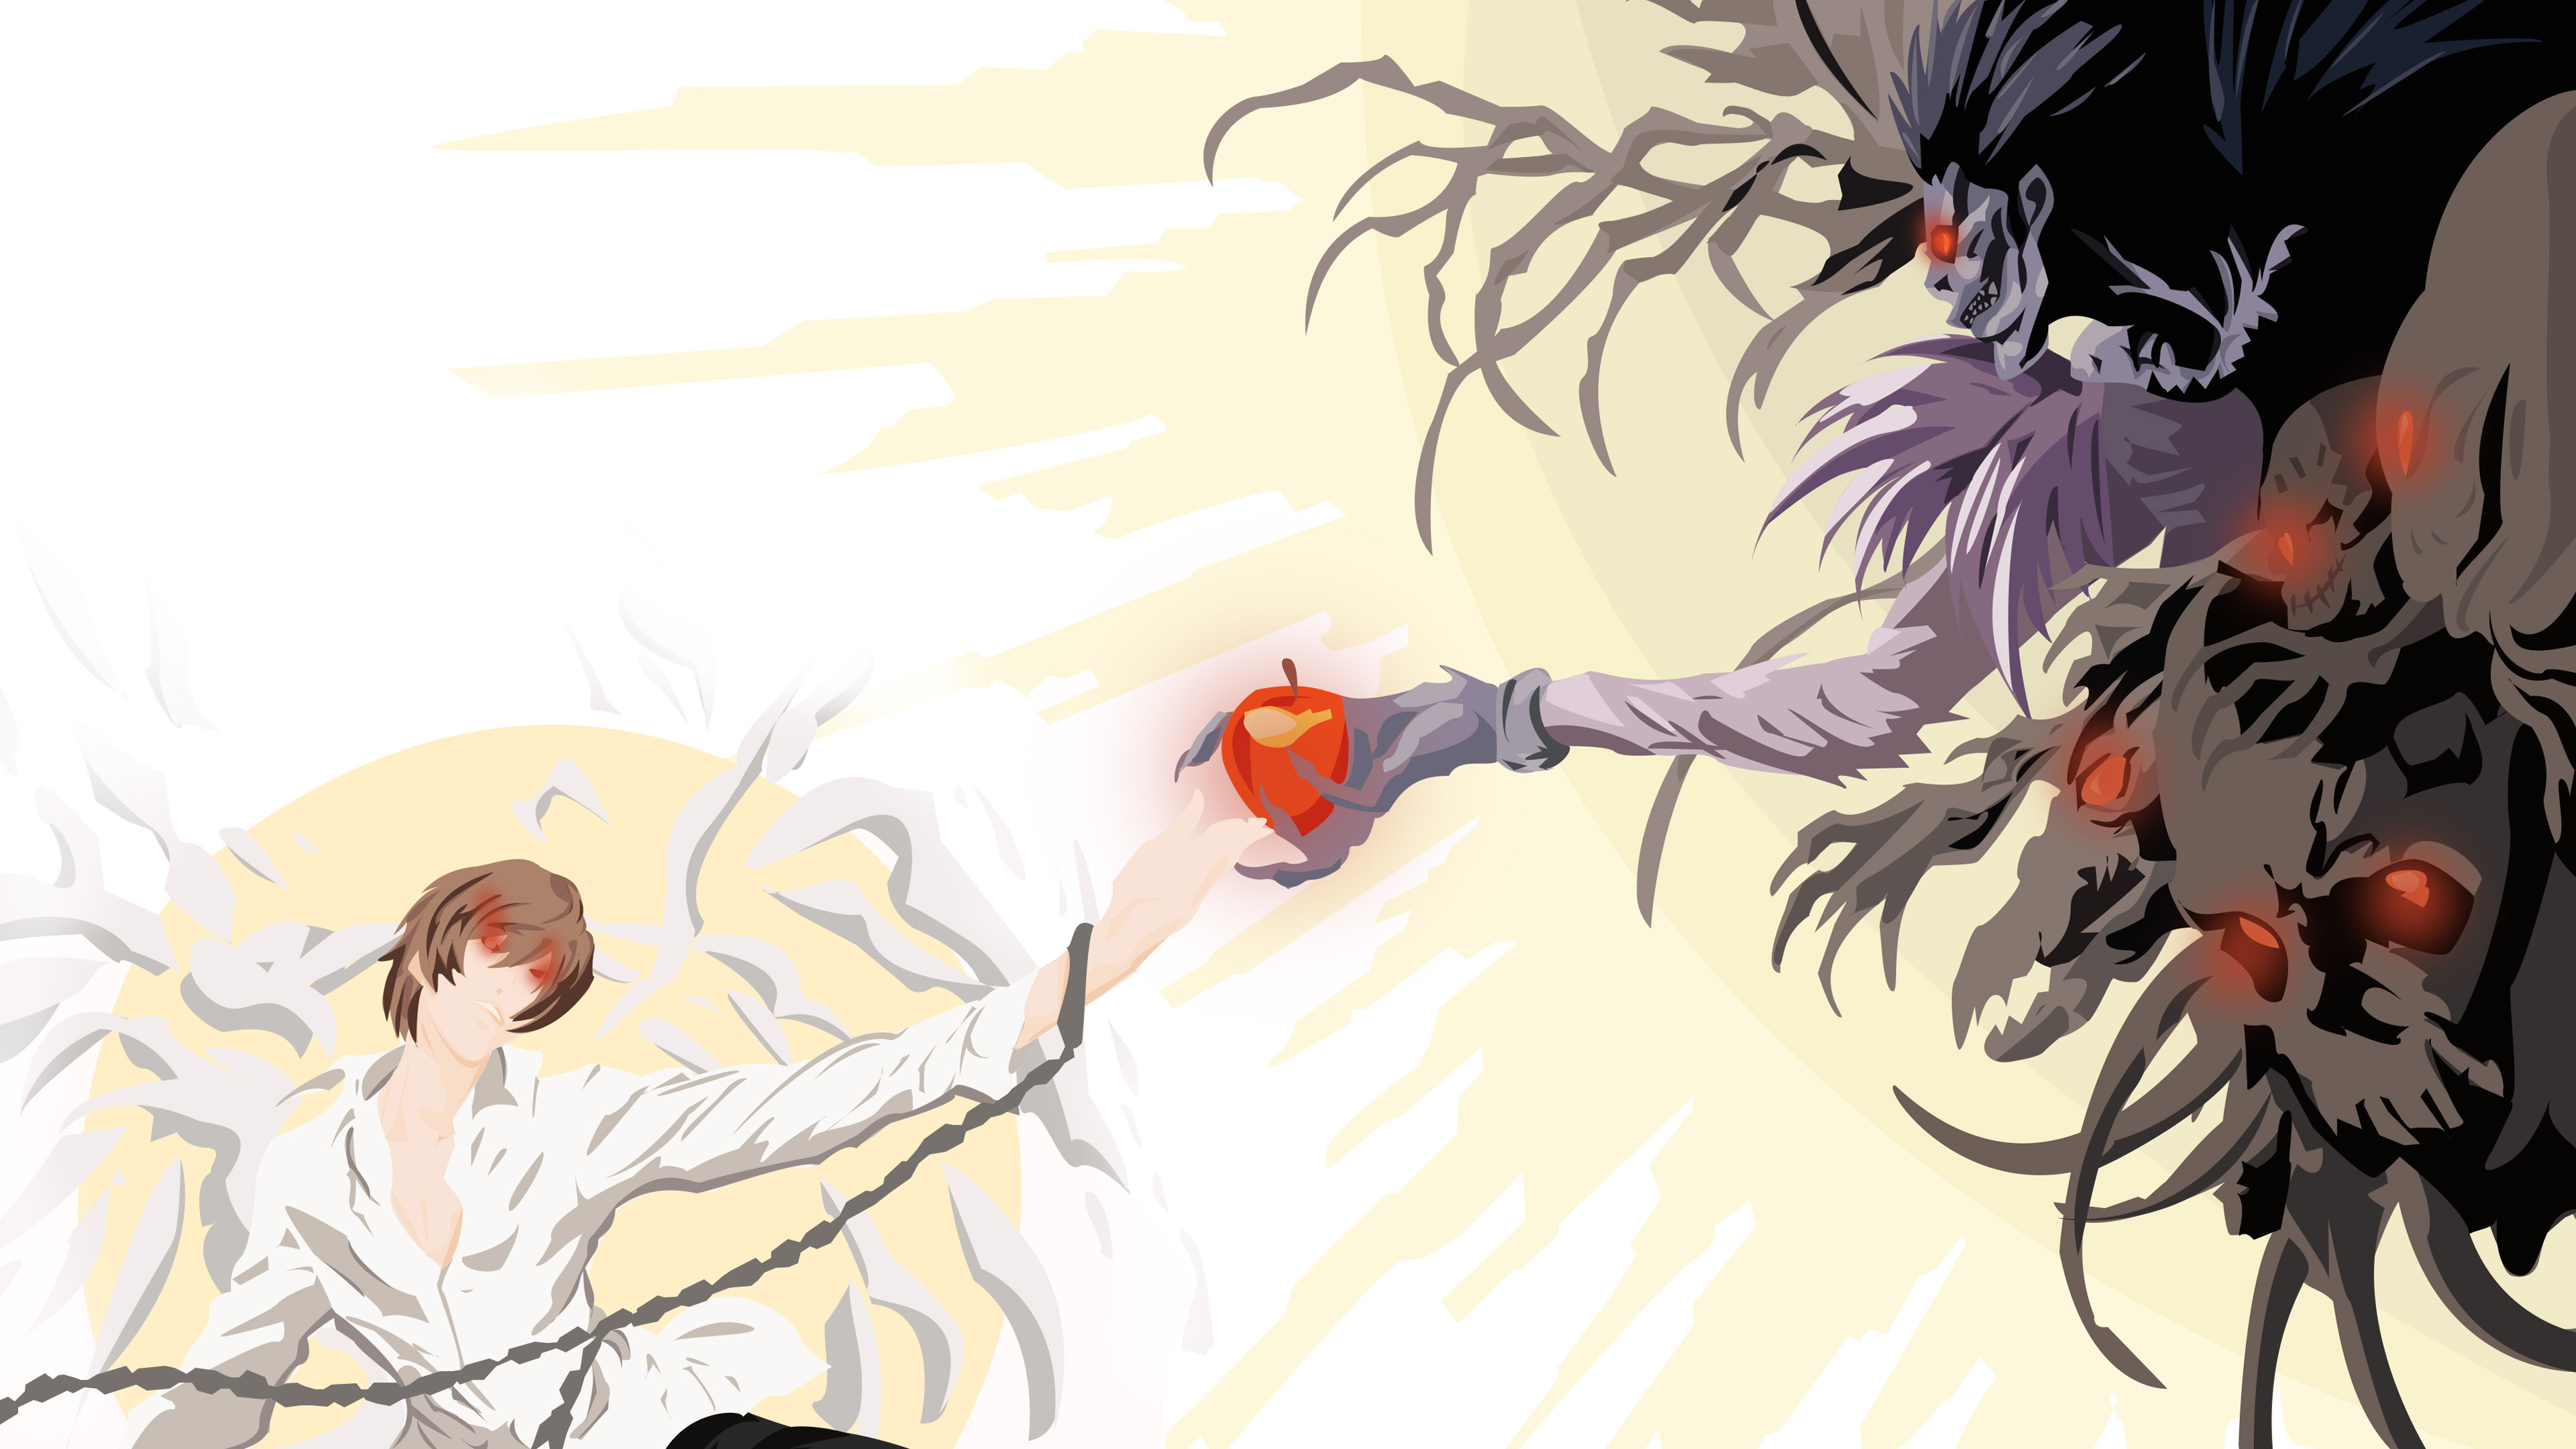 Smiley brown hair glowing eyes kira light yagami with handlock and red eyes ryuk with apple death note k 2K anime